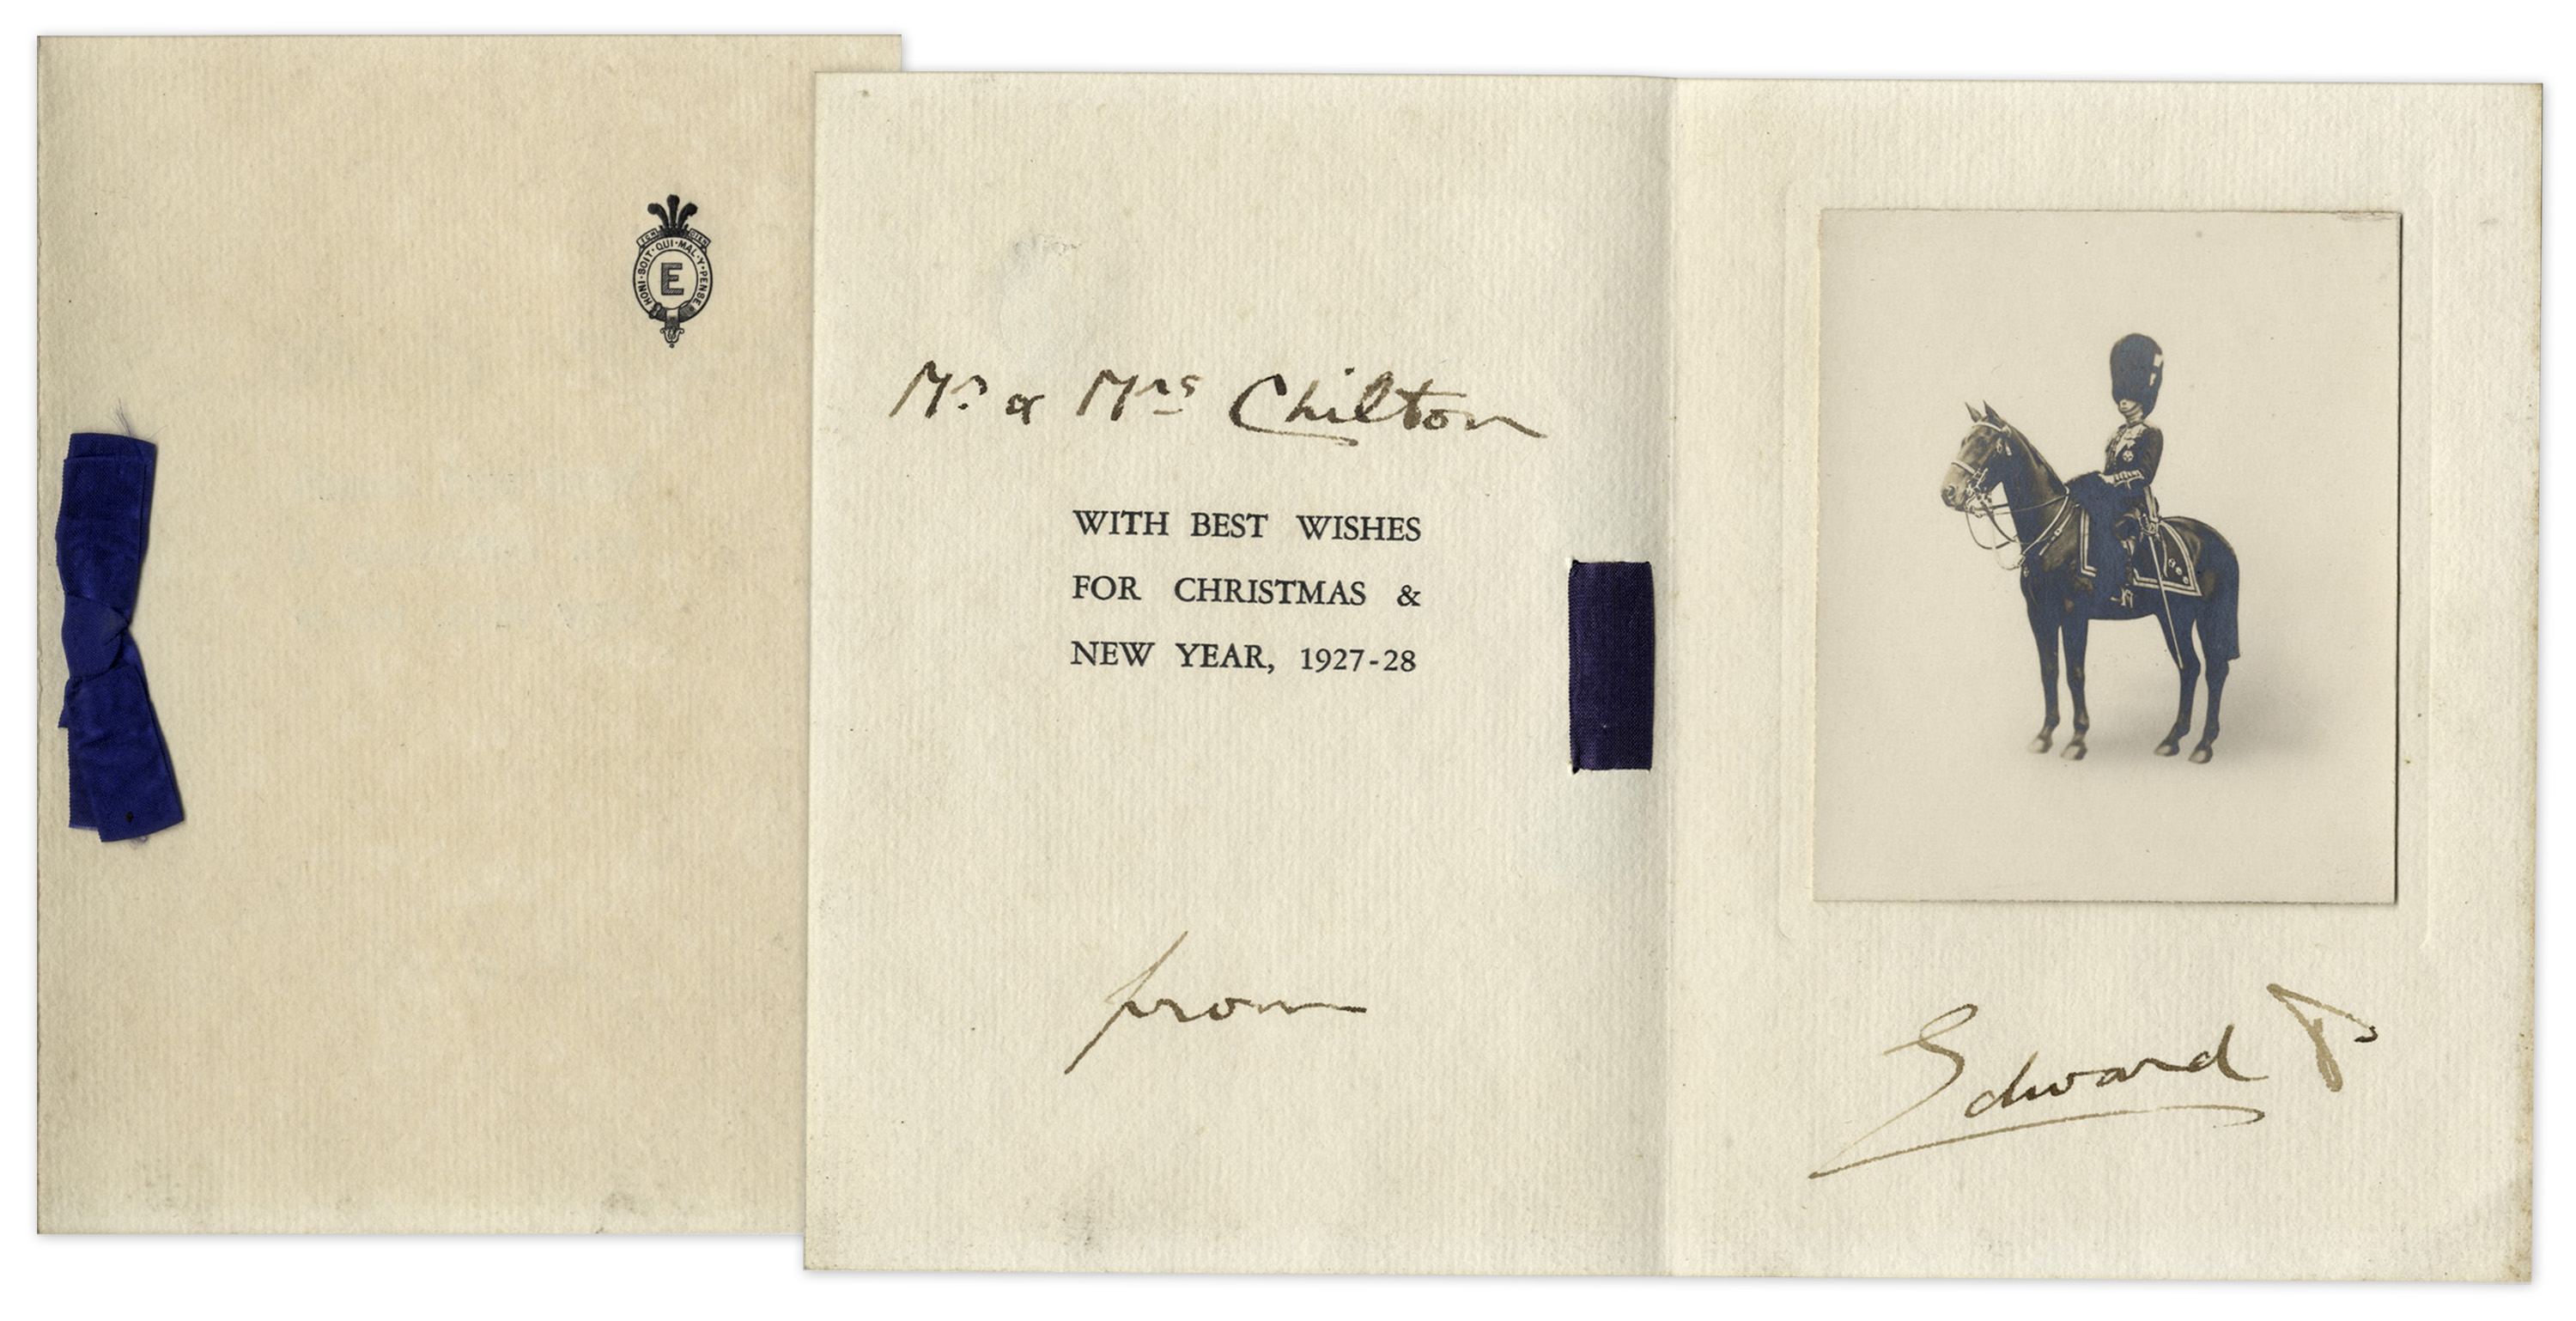 Sell Your King Edward VIII Autograph at Nate D. Sanders Auctions